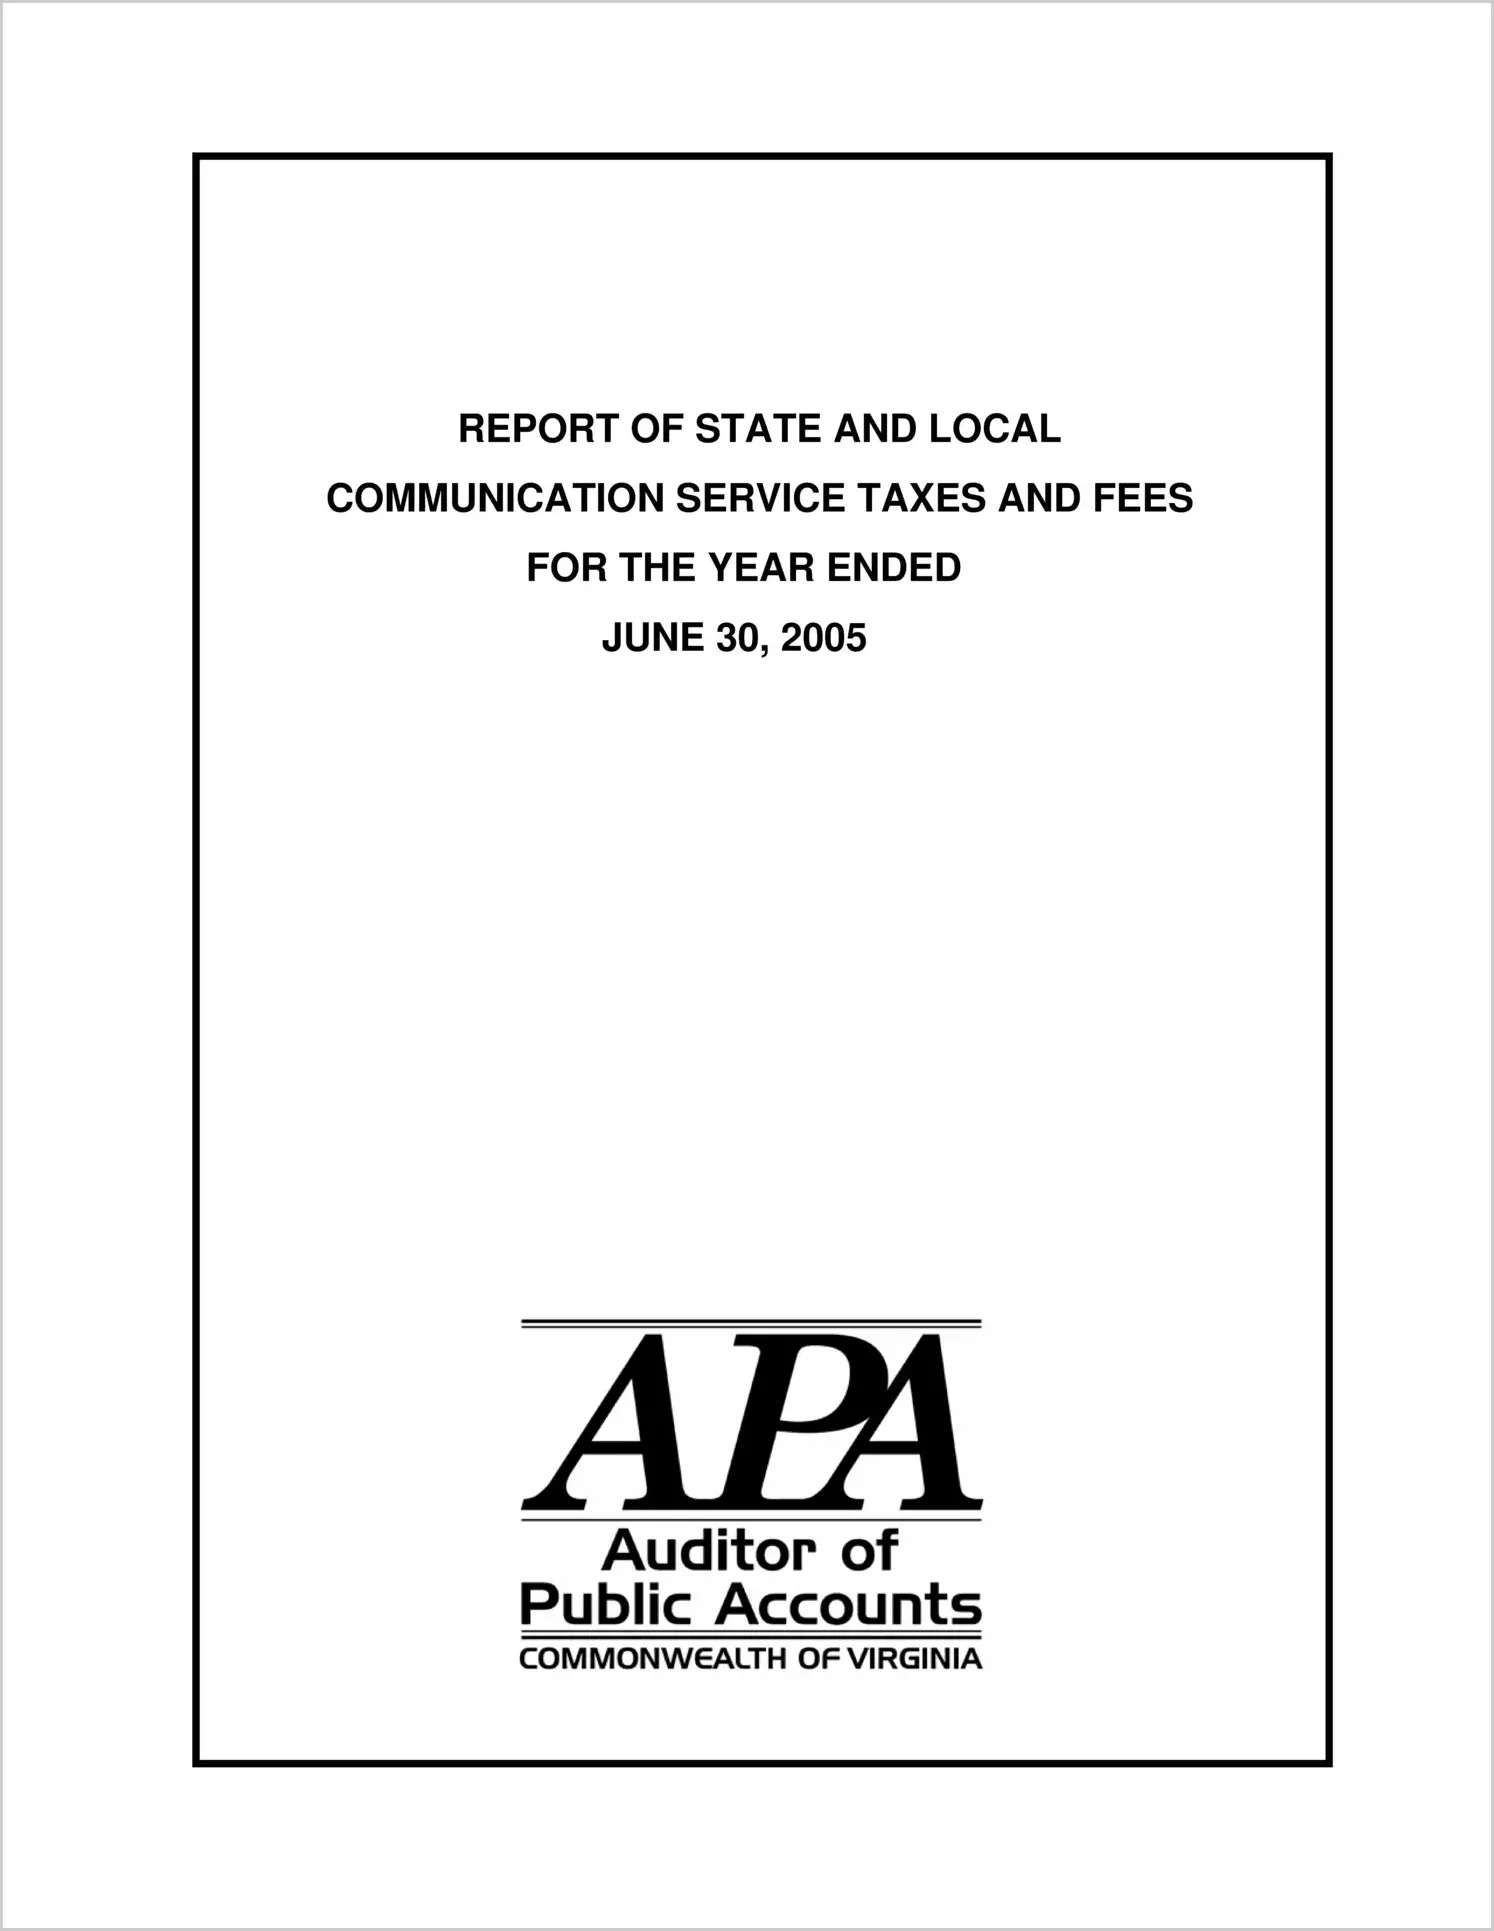 Report on State and Local Communication Service Taxes and Fees for the year ended June 30, 2005